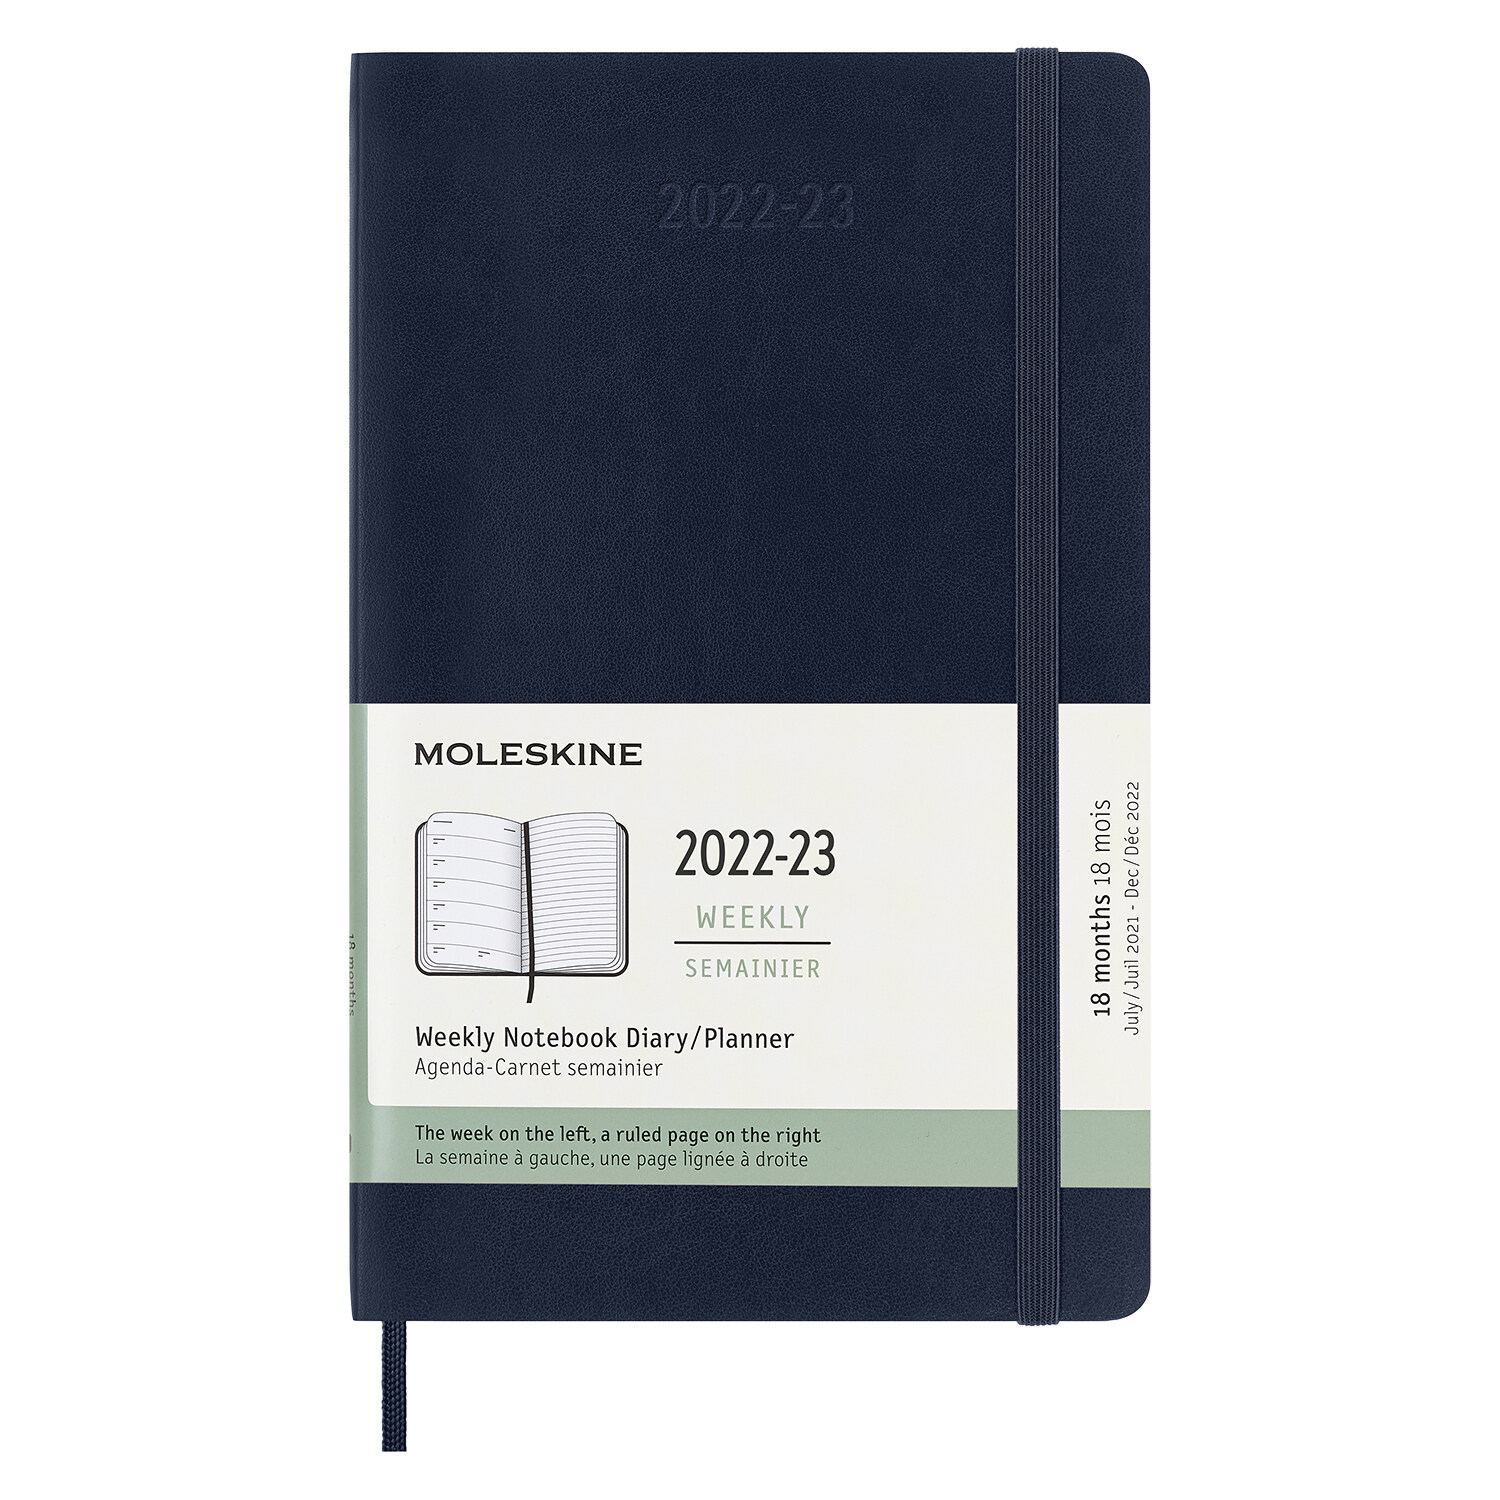 Moleskine 2023 Weekly Notebook Planner, 18m, Large, Saphire Blue, Soft Cover (5 X 8.25) (Other)